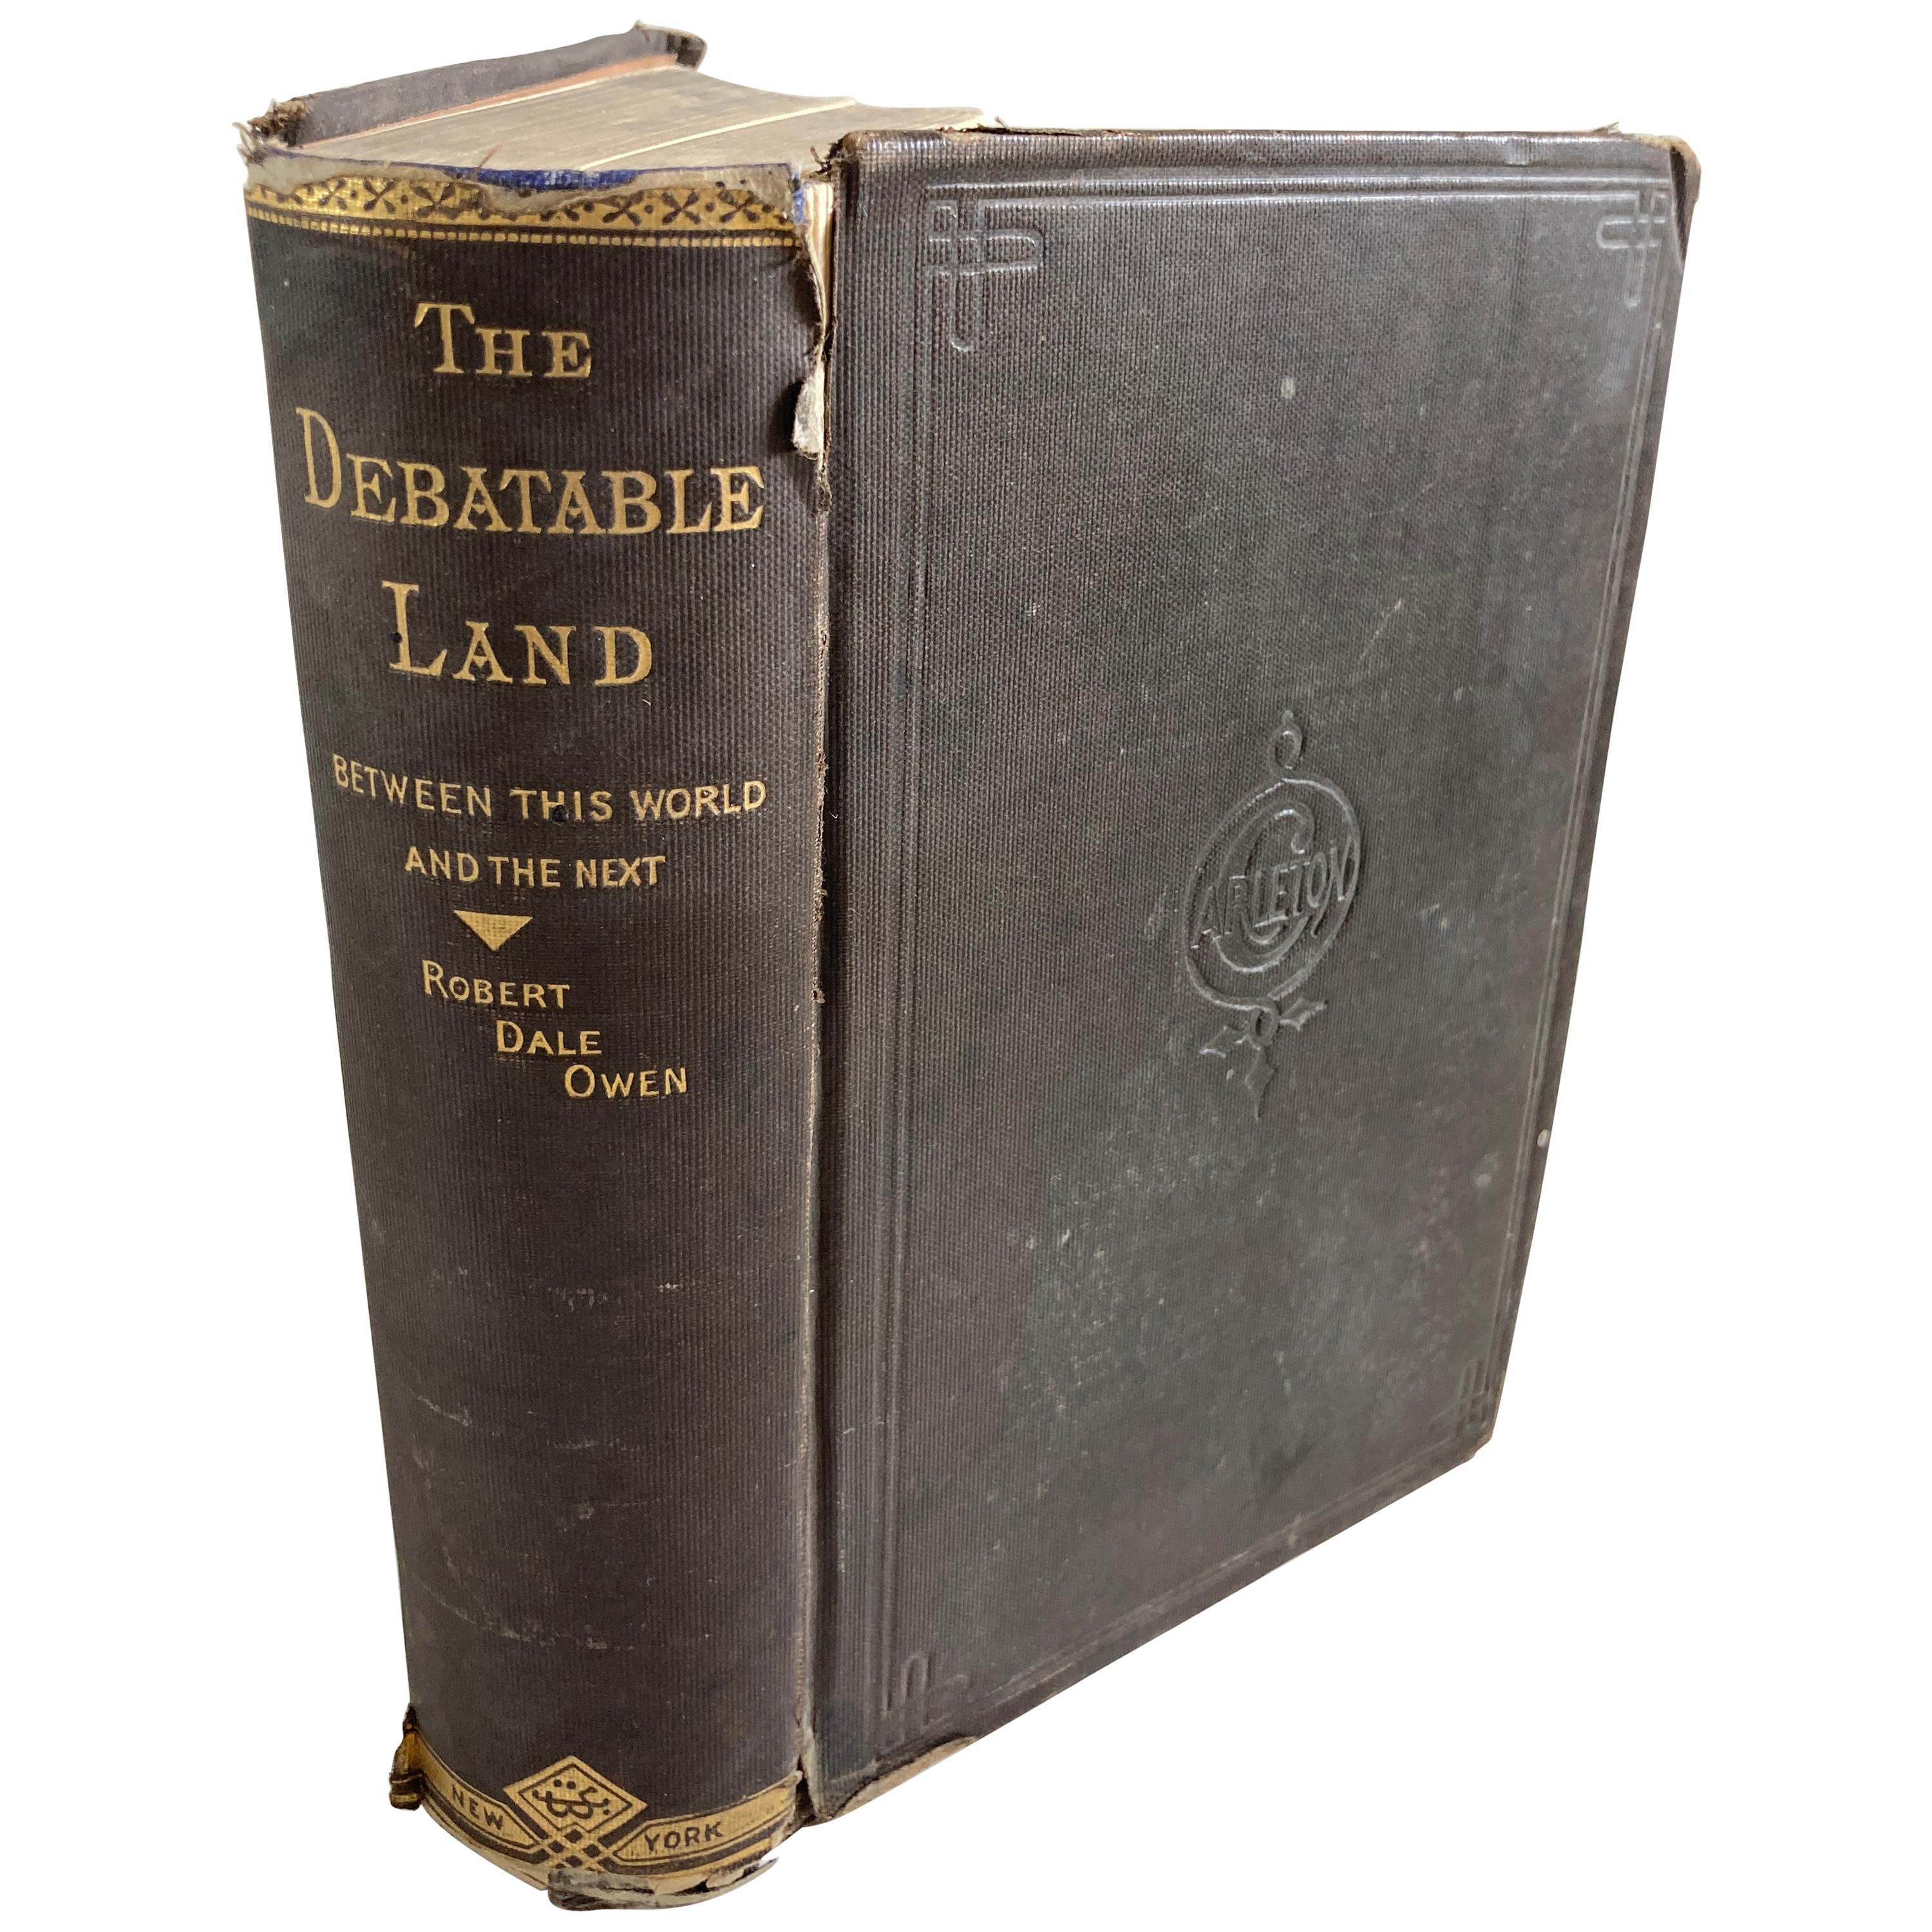 The Debatable Land Between This World and the Next Book by Robert Dale Owen For Sale